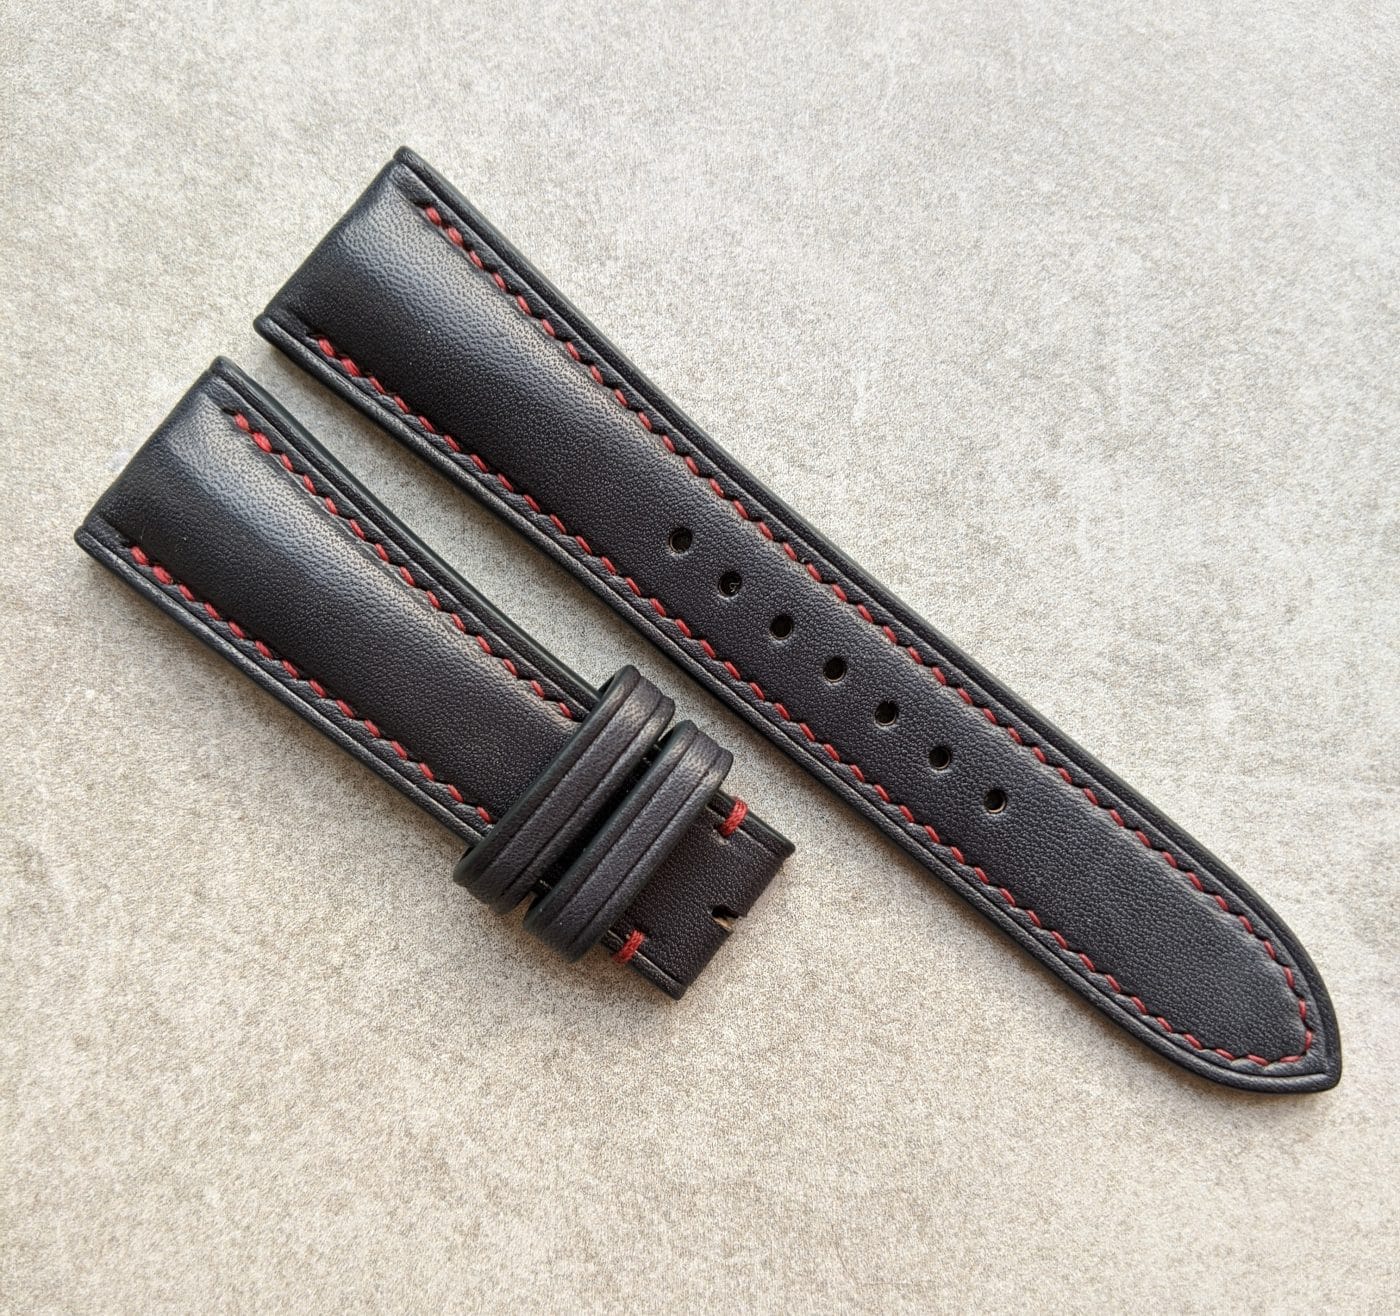 French Calfskin Watch Strap - Black Contrast - The Strap Tailor